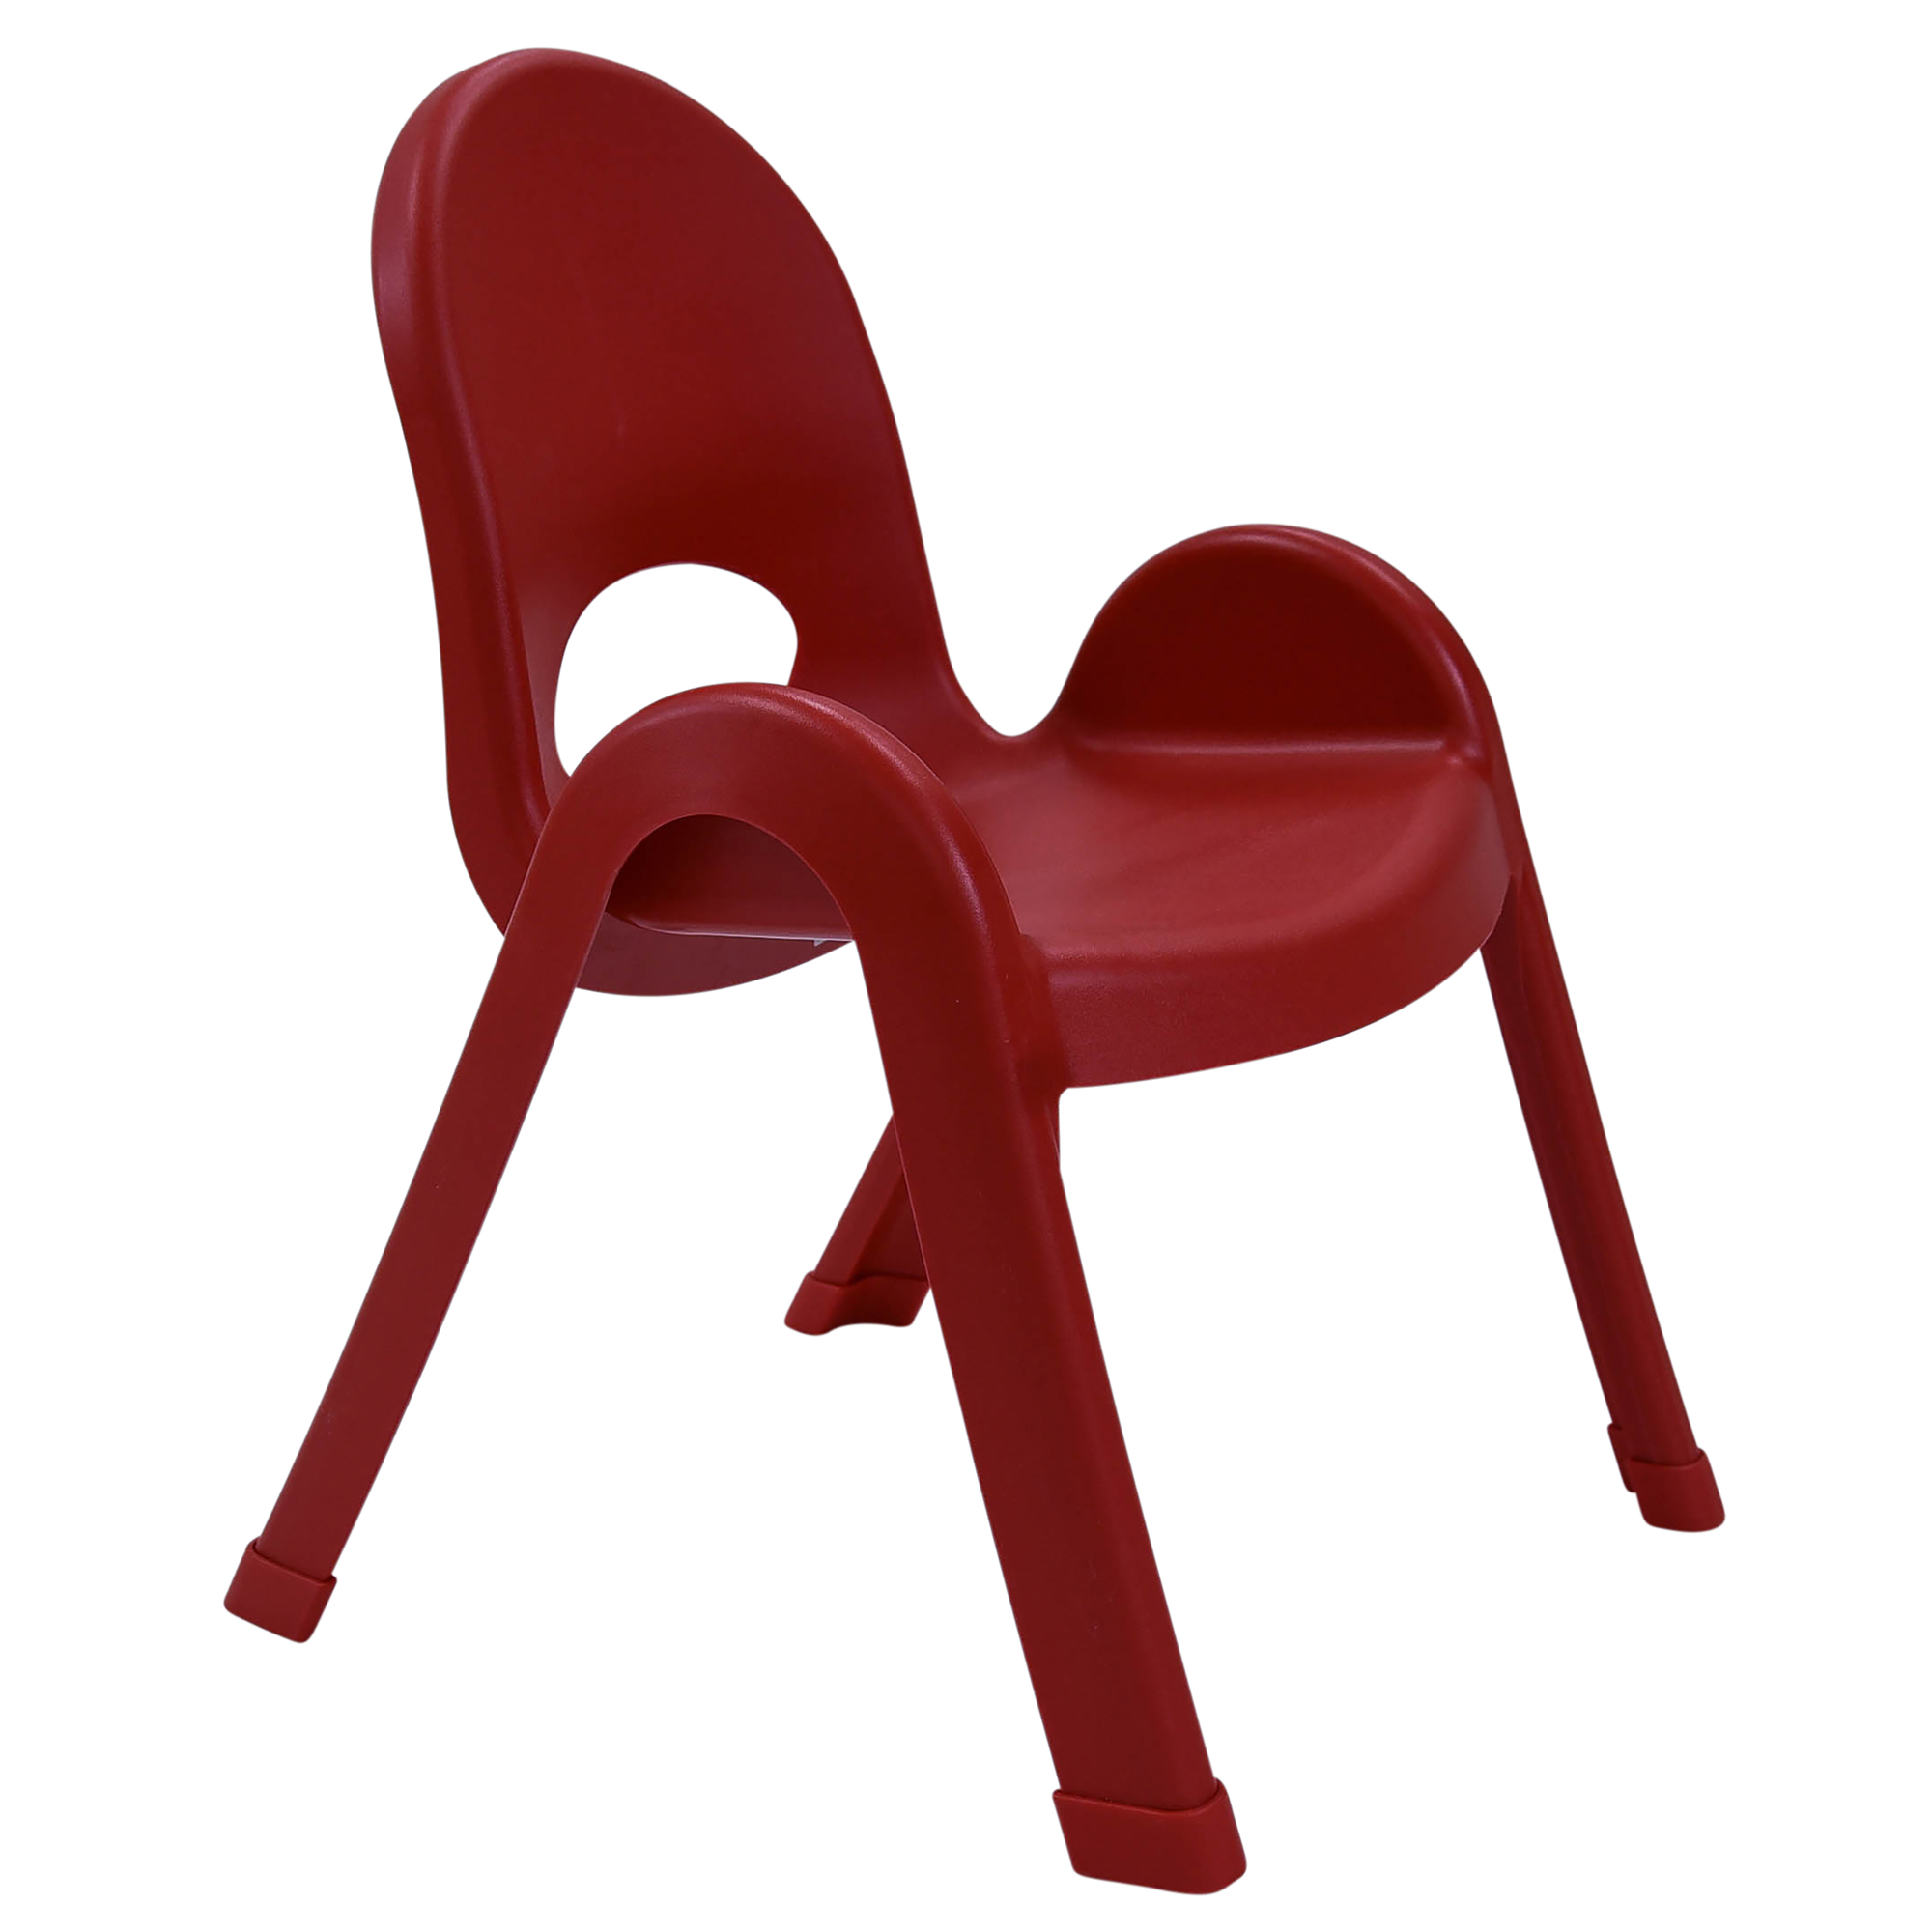 Value Stack™ 28 cm  Chair - Candy Apple Red